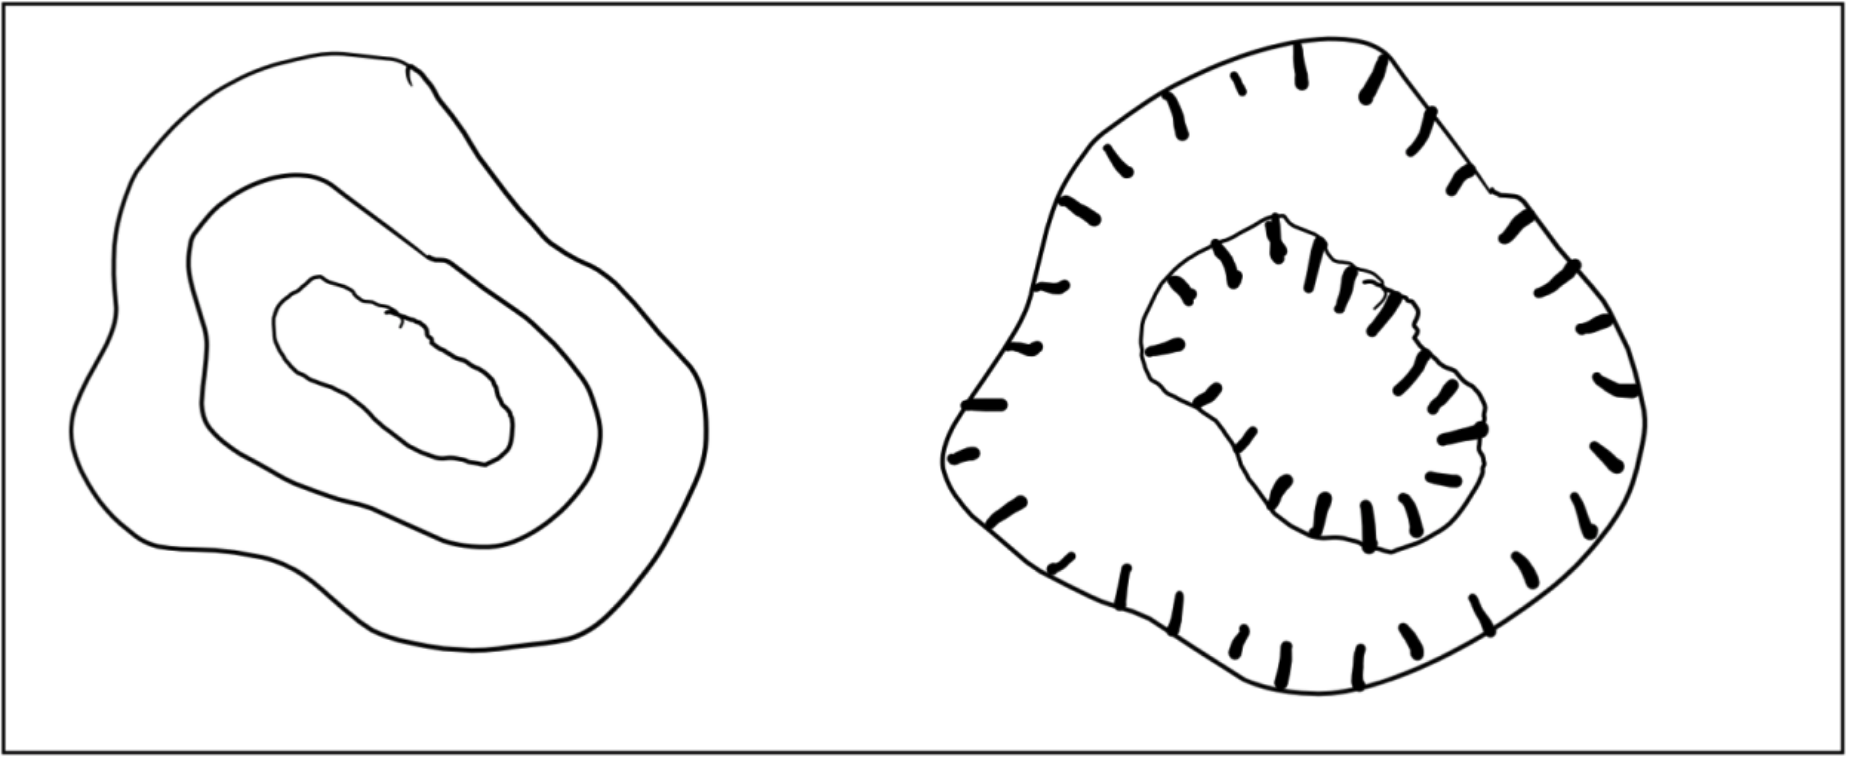 Figure 2.18, rules of contour maps: concentric closed circles representing high or low points.